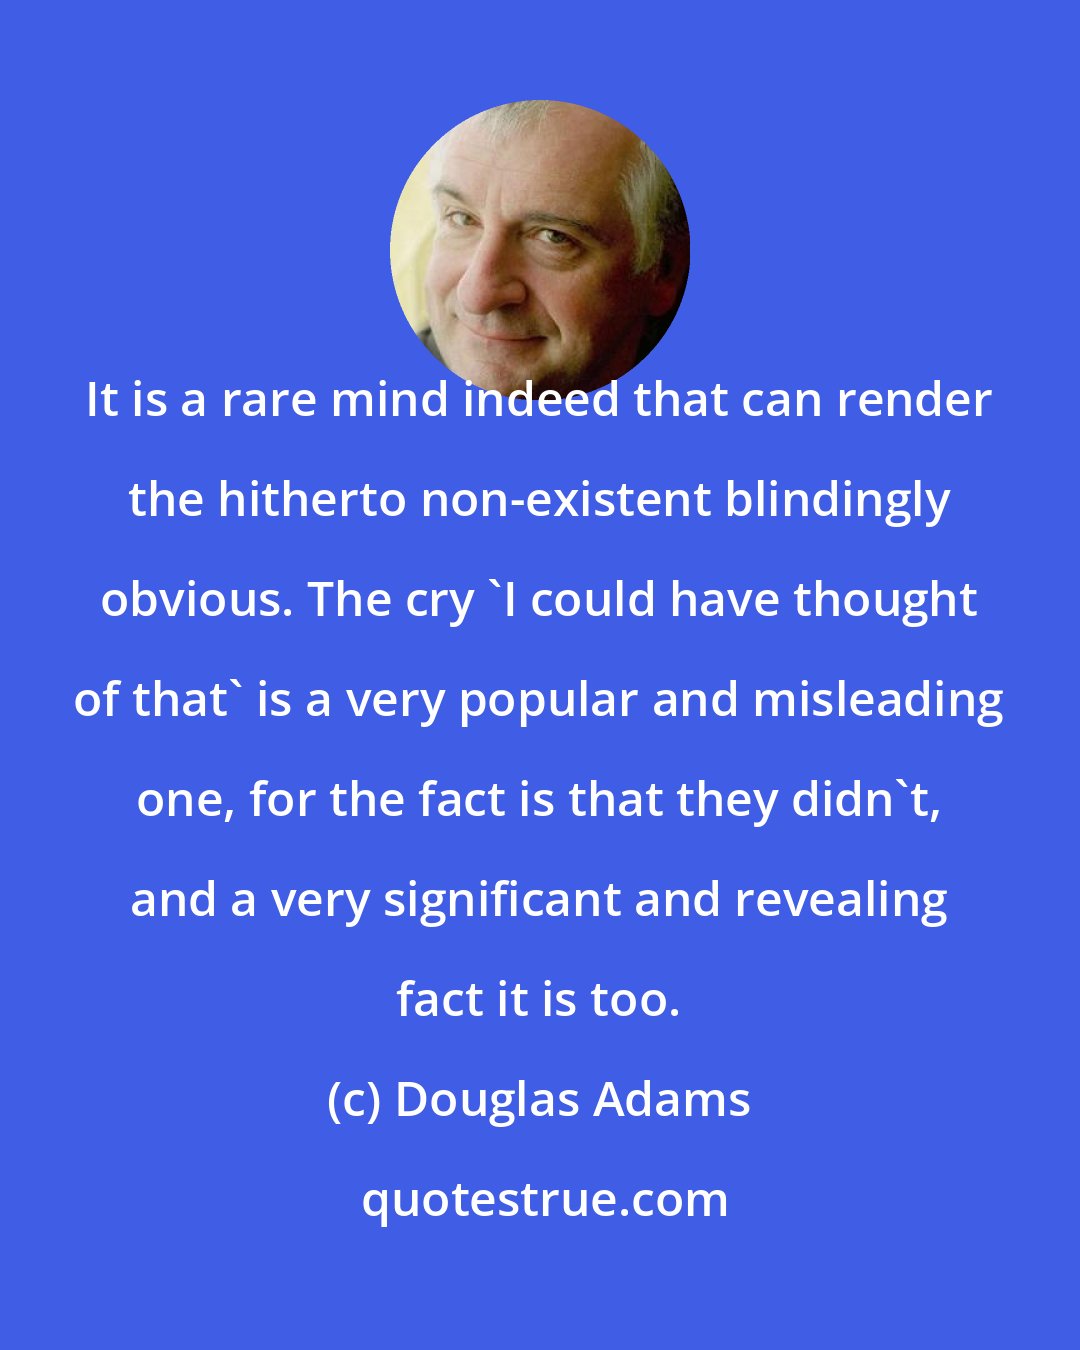 Douglas Adams: It is a rare mind indeed that can render the hitherto non-existent blindingly obvious. The cry 'I could have thought of that' is a very popular and misleading one, for the fact is that they didn't, and a very significant and revealing fact it is too.